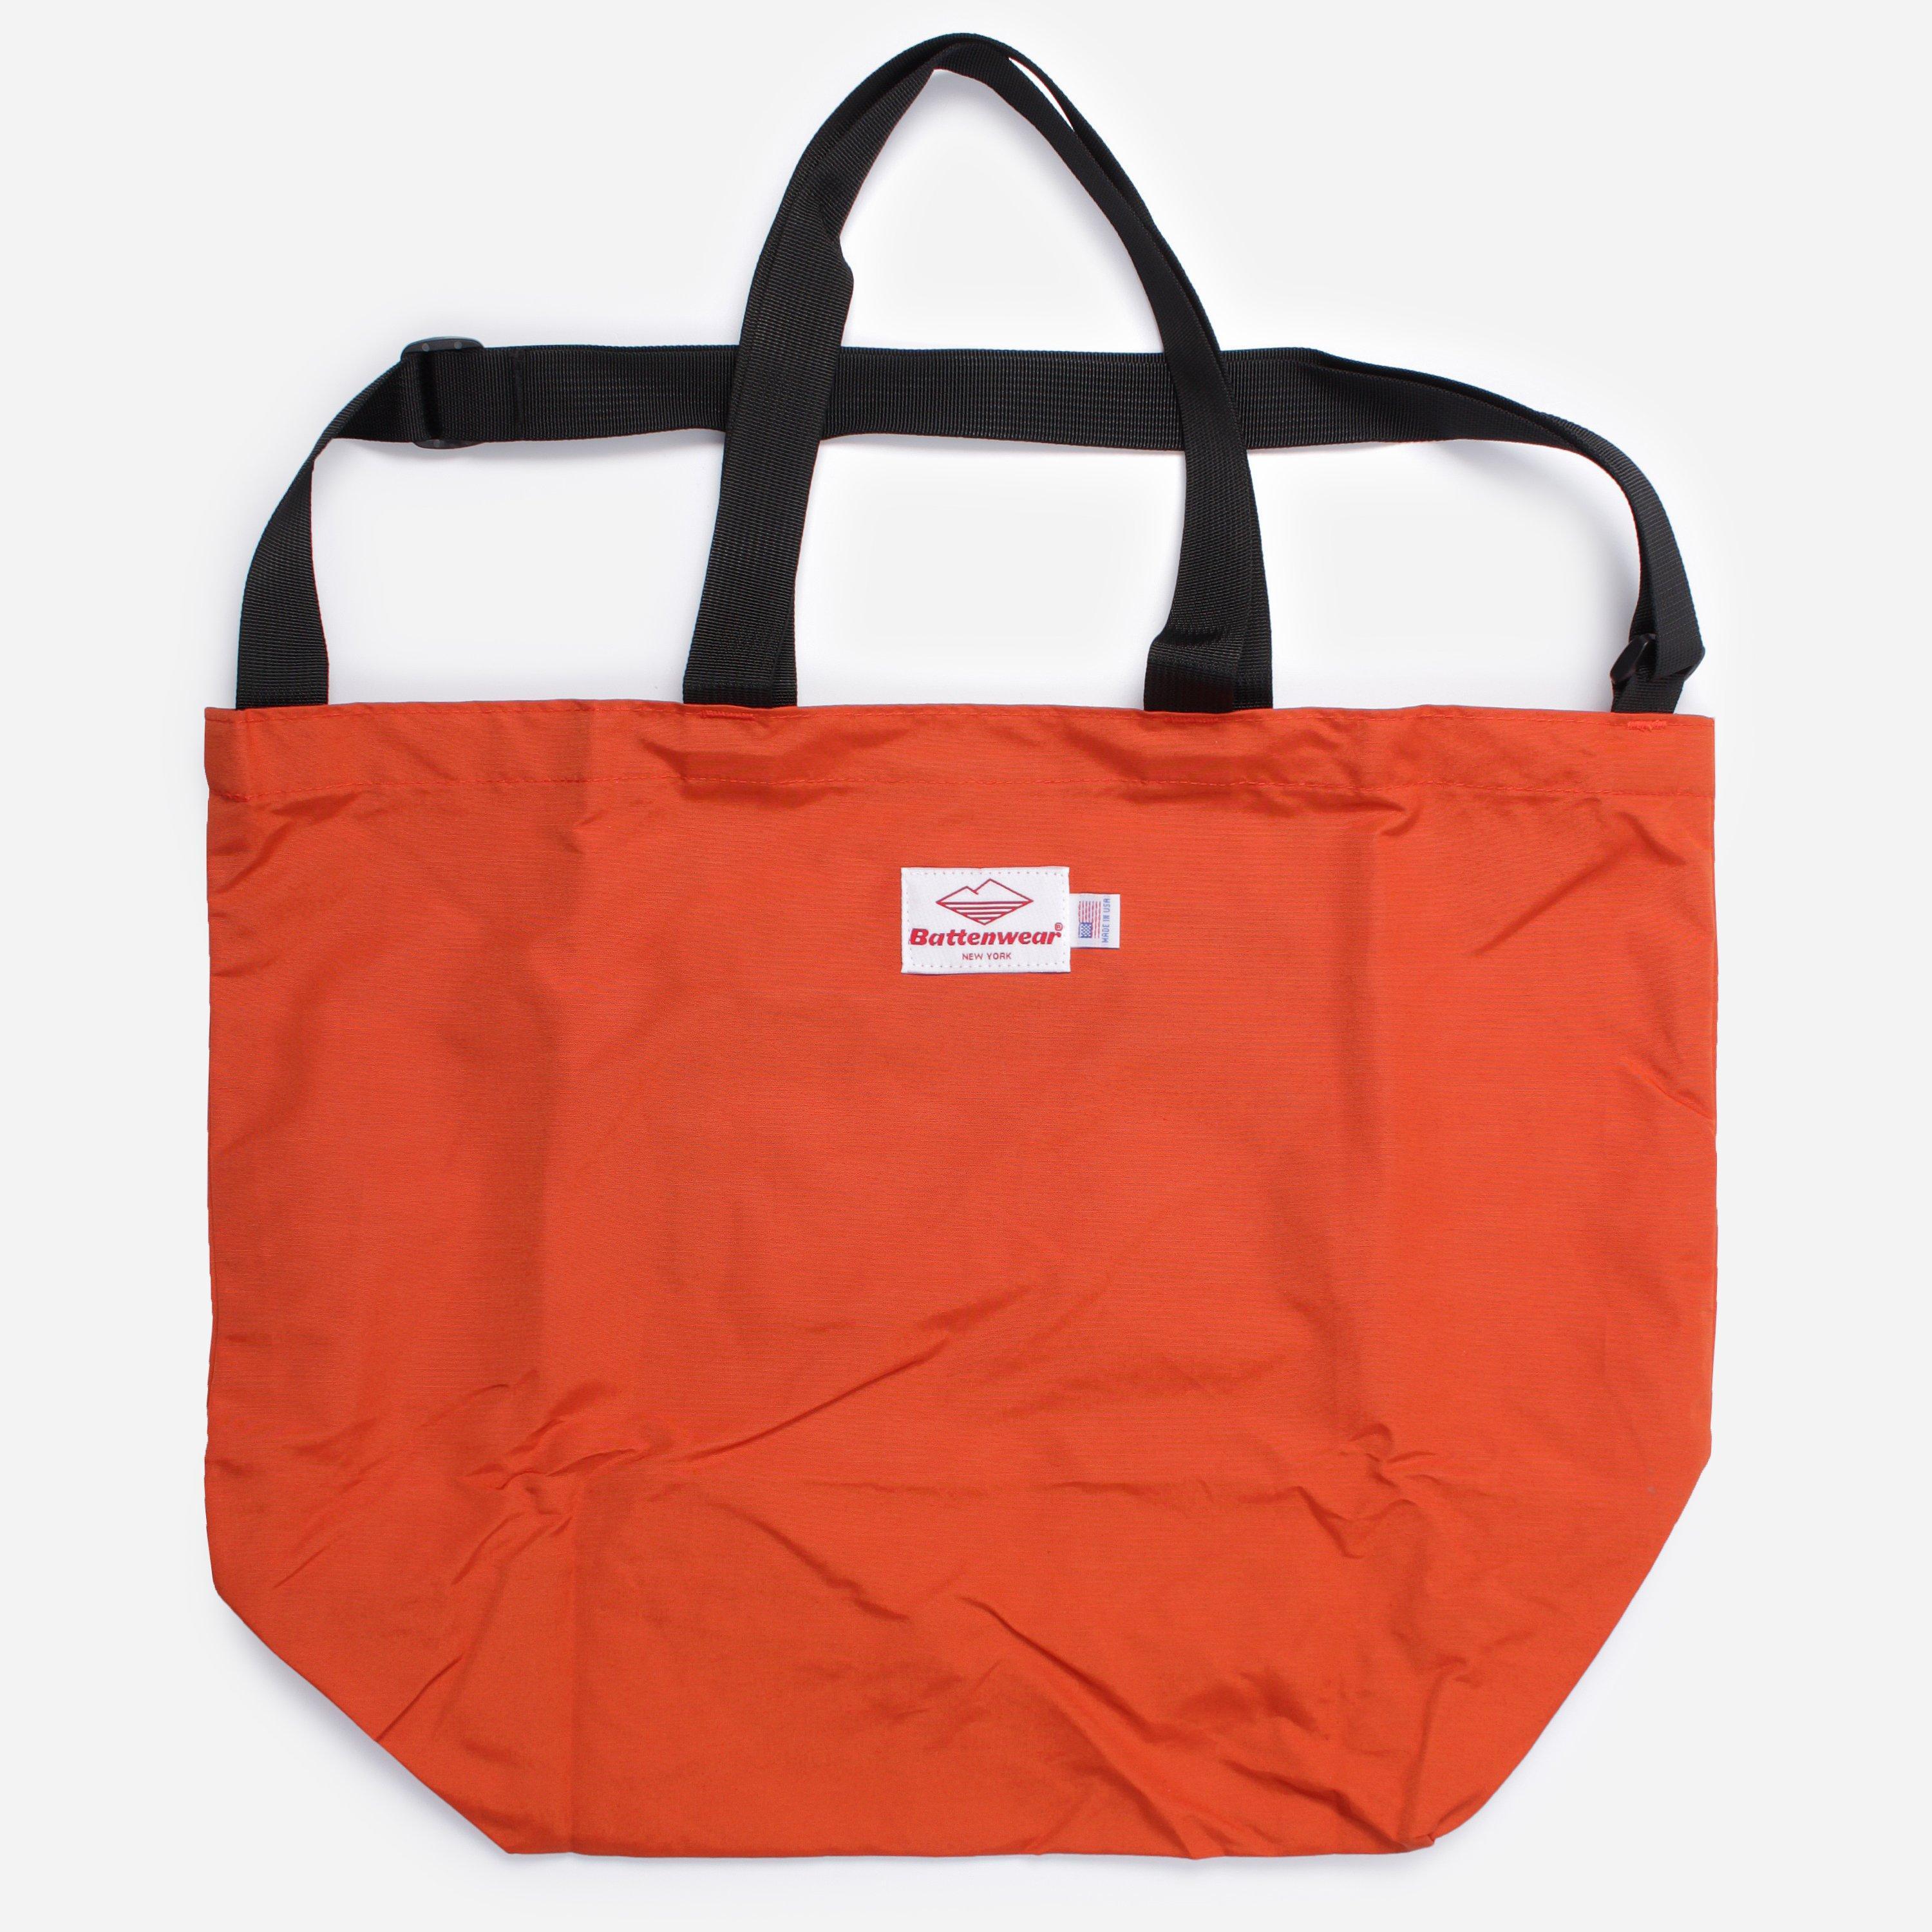 Battenwear Packable Tote in Red for Men - Lyst